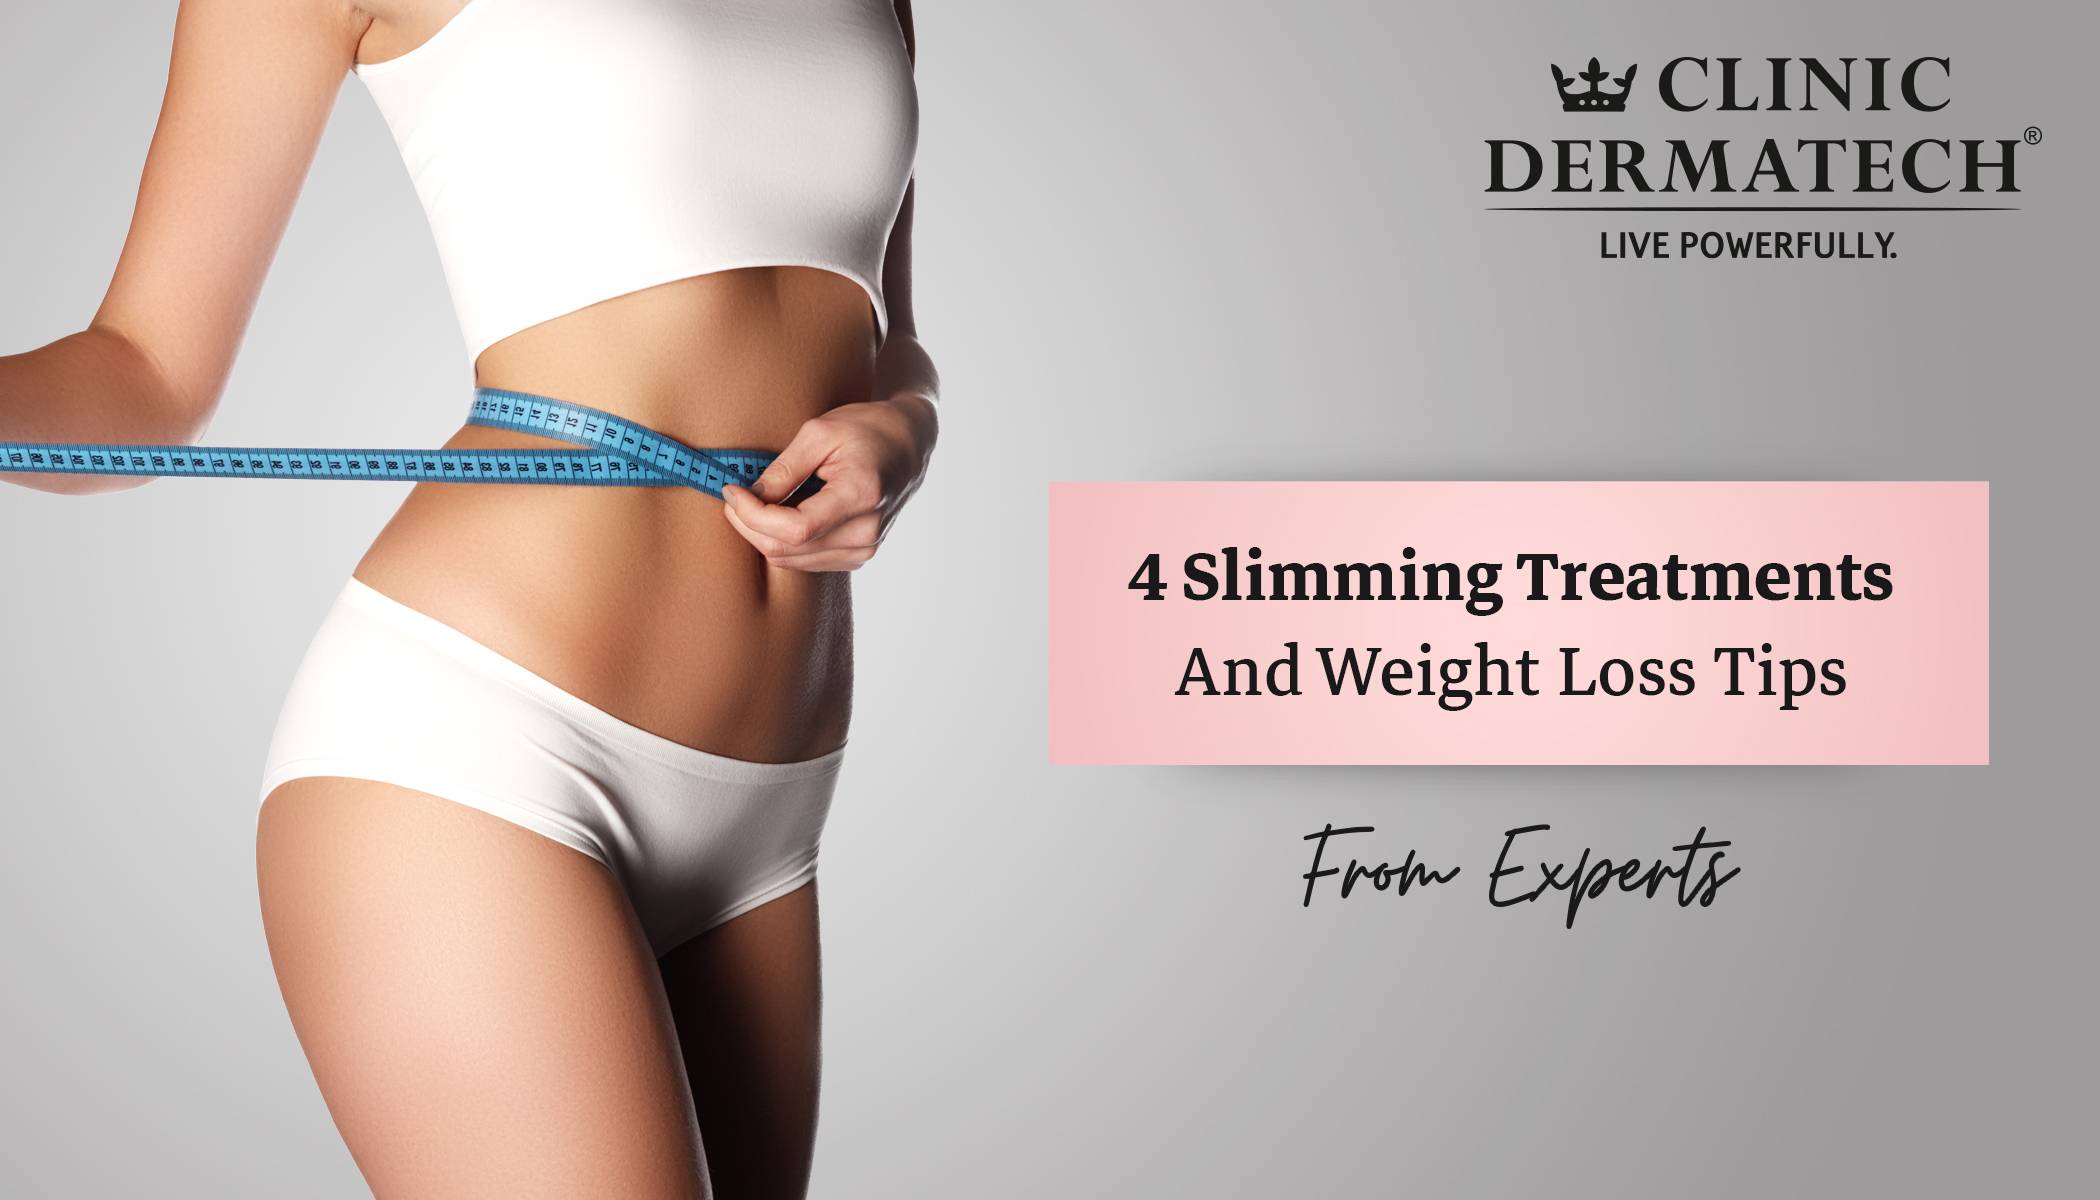 4 Slimming Treatments And Weight Loss Tips From Experts